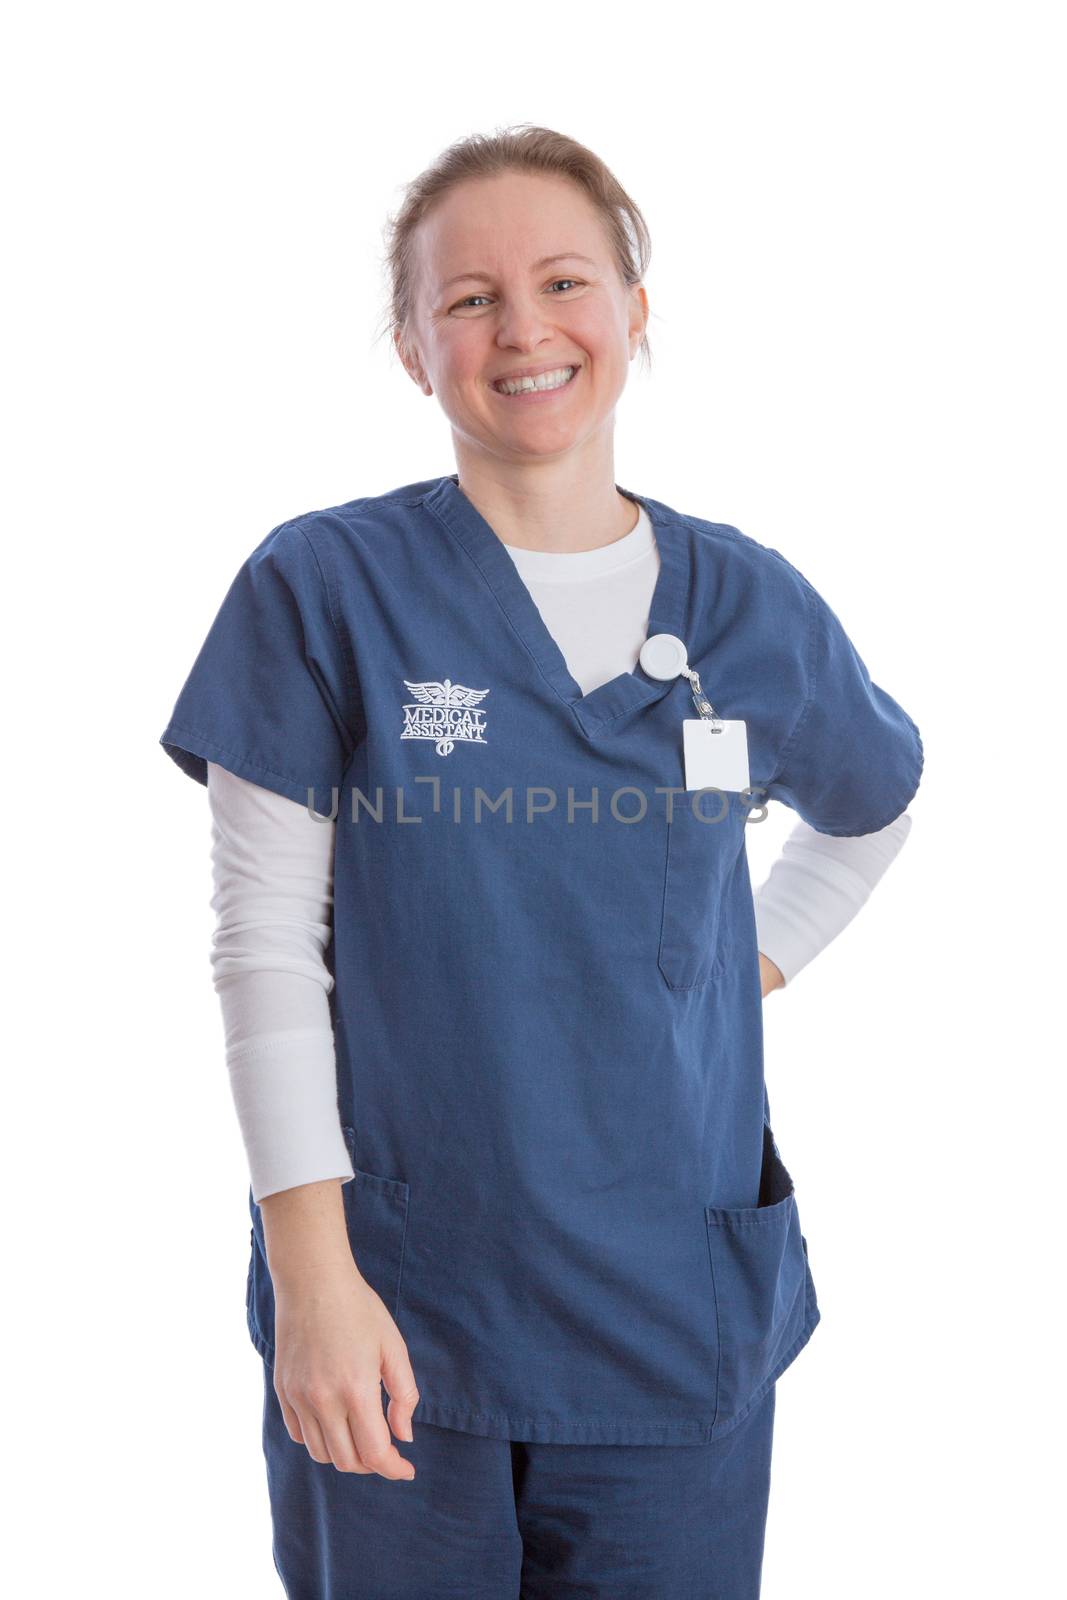 Smiling happy attractive young medical assistant in her blue uniform standing looking at the camera with a beaming friendly smile, isolated on white